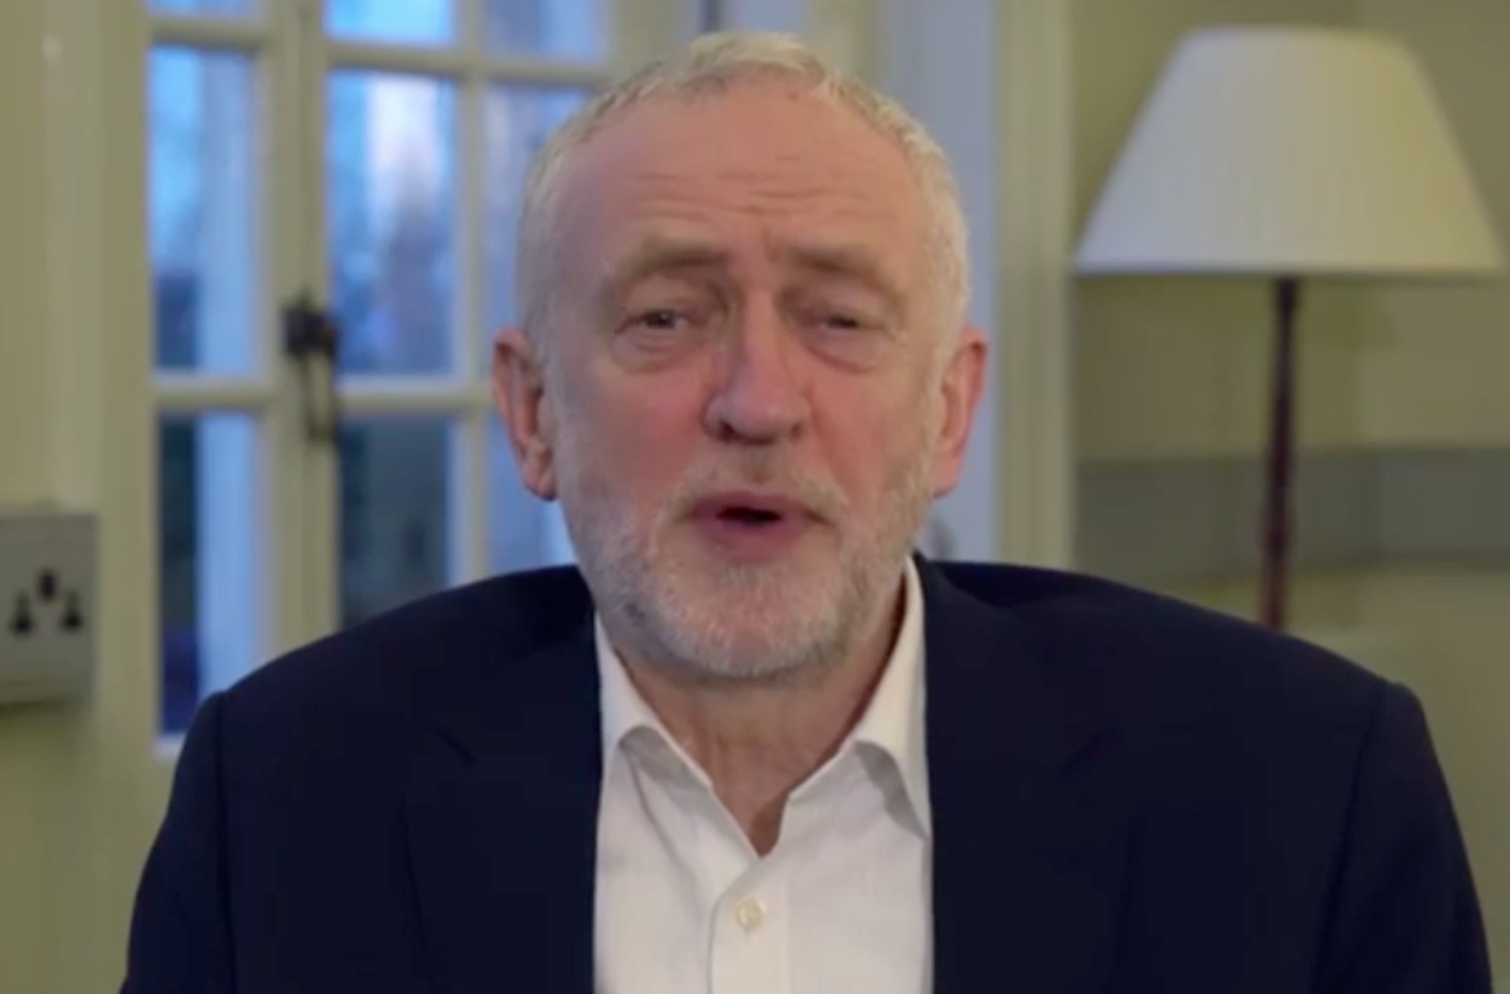 Jeremy Corbyn hits back over spy claims, warning &apos;billionaire tax exile&apos; newspaper owners &apos;change is coming&apos;